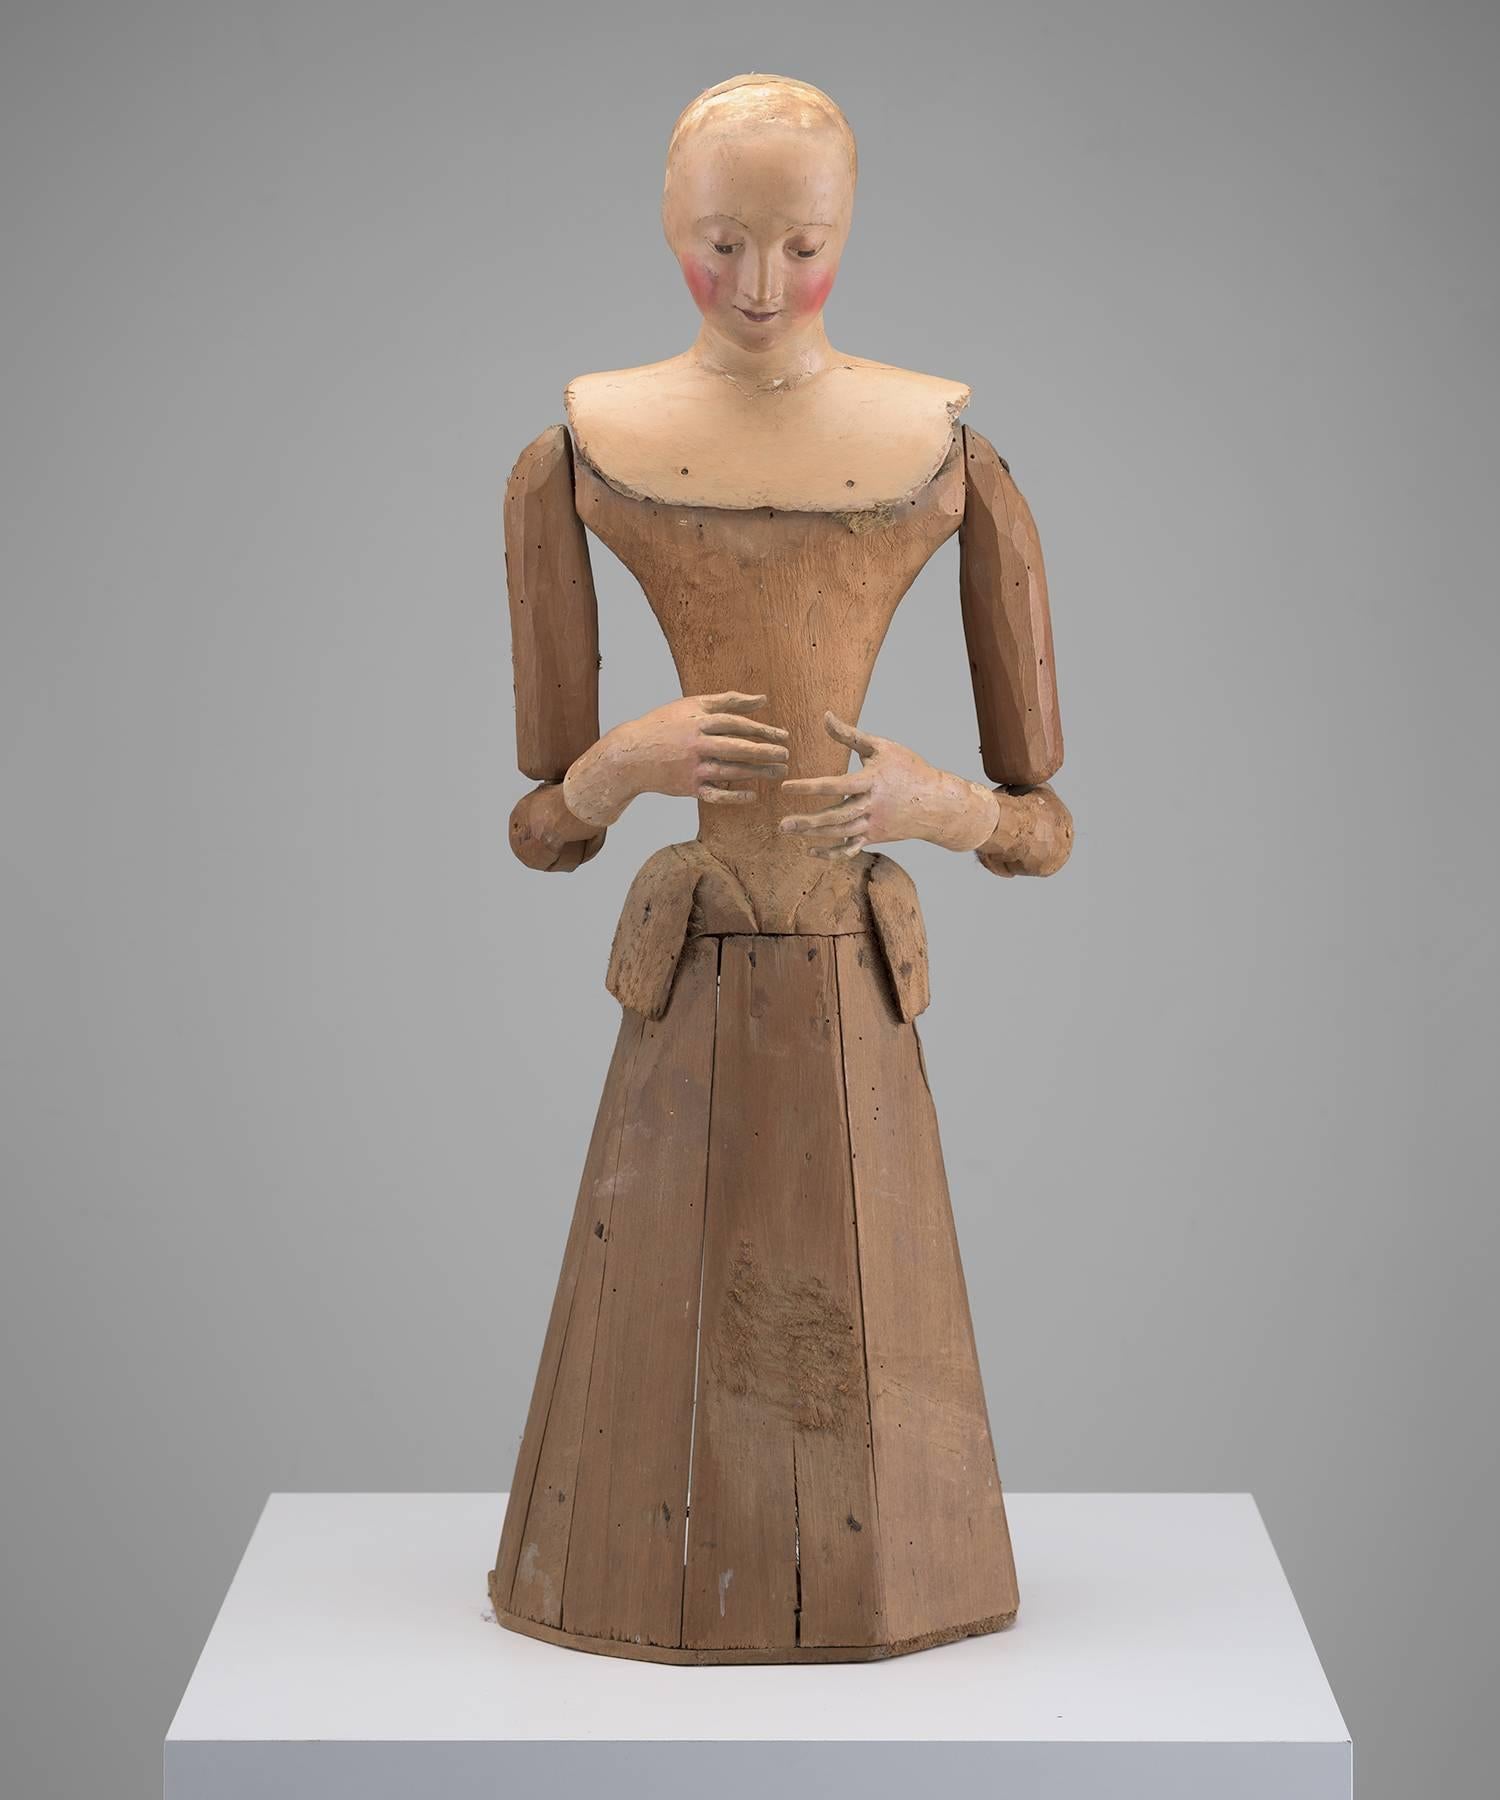 Wooden figure with open back and original paint.